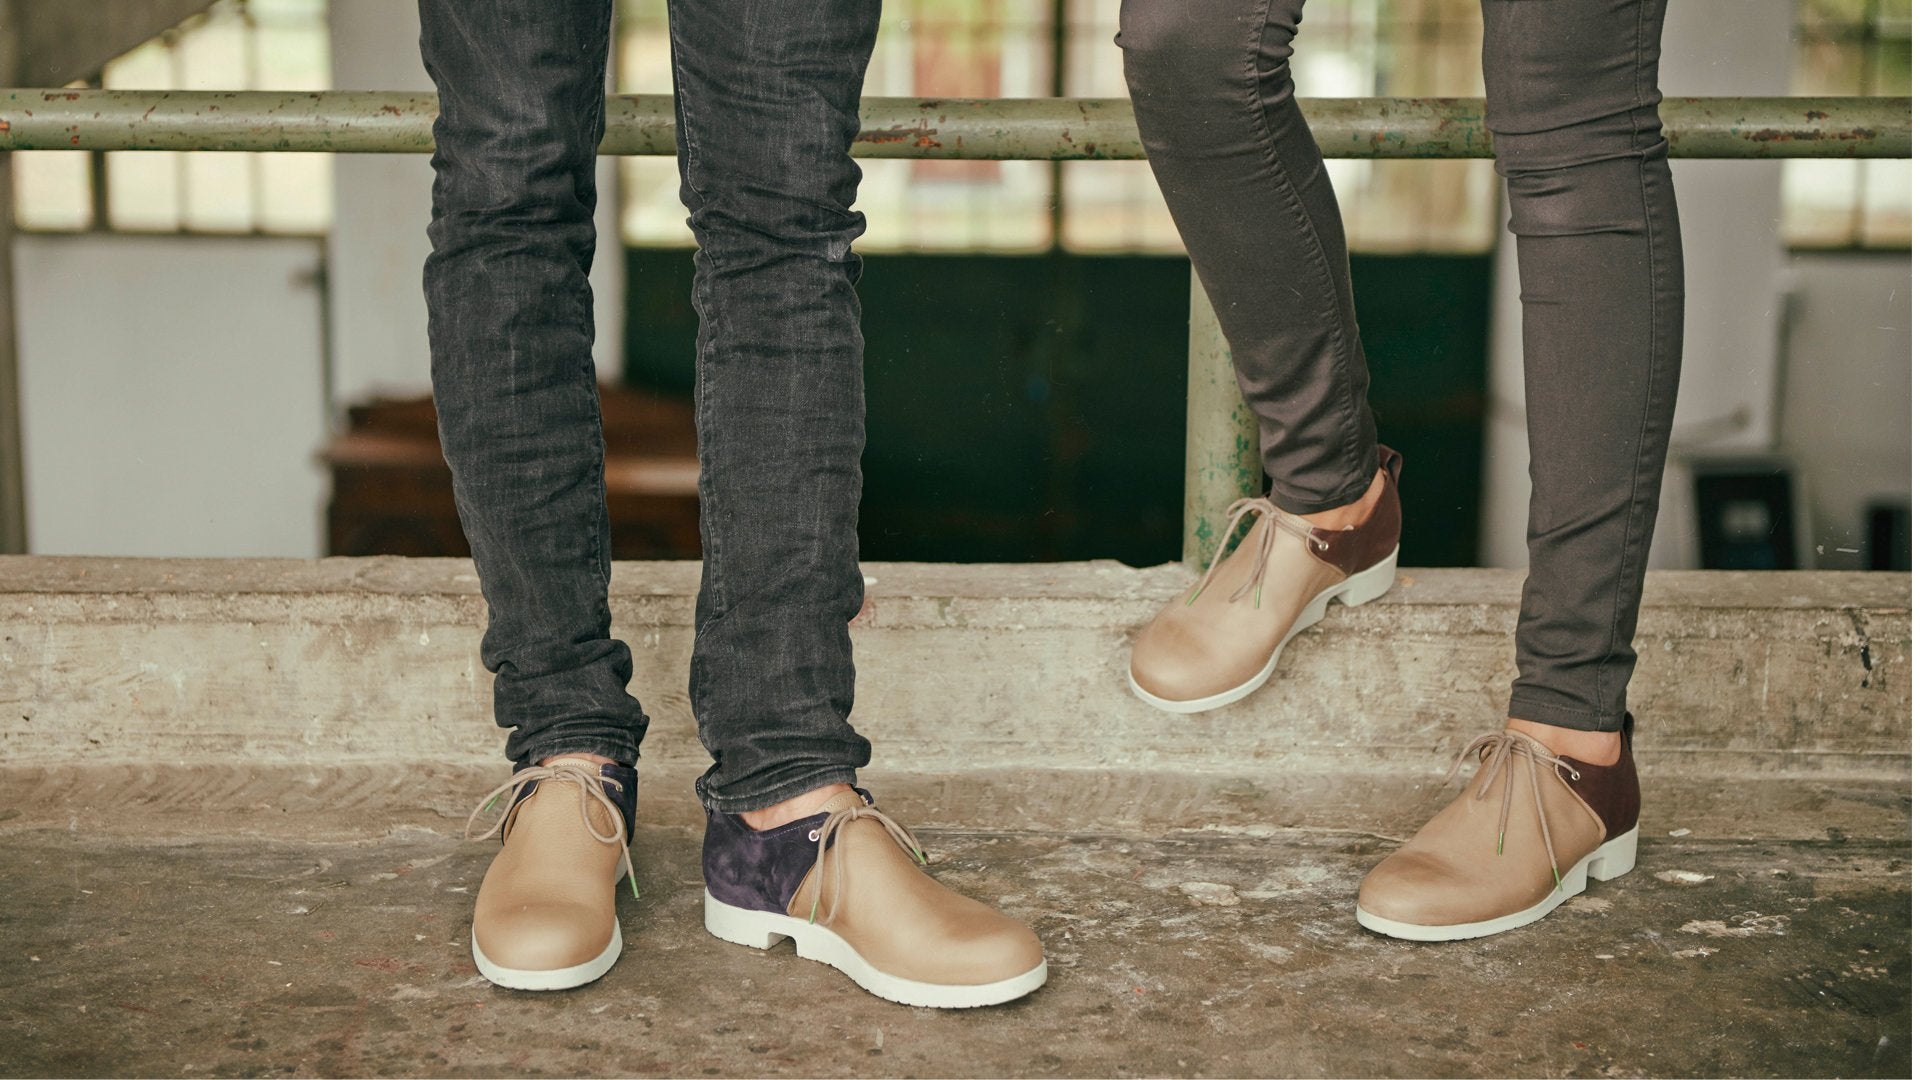 Bend-it Shoes: Simply Comfortable